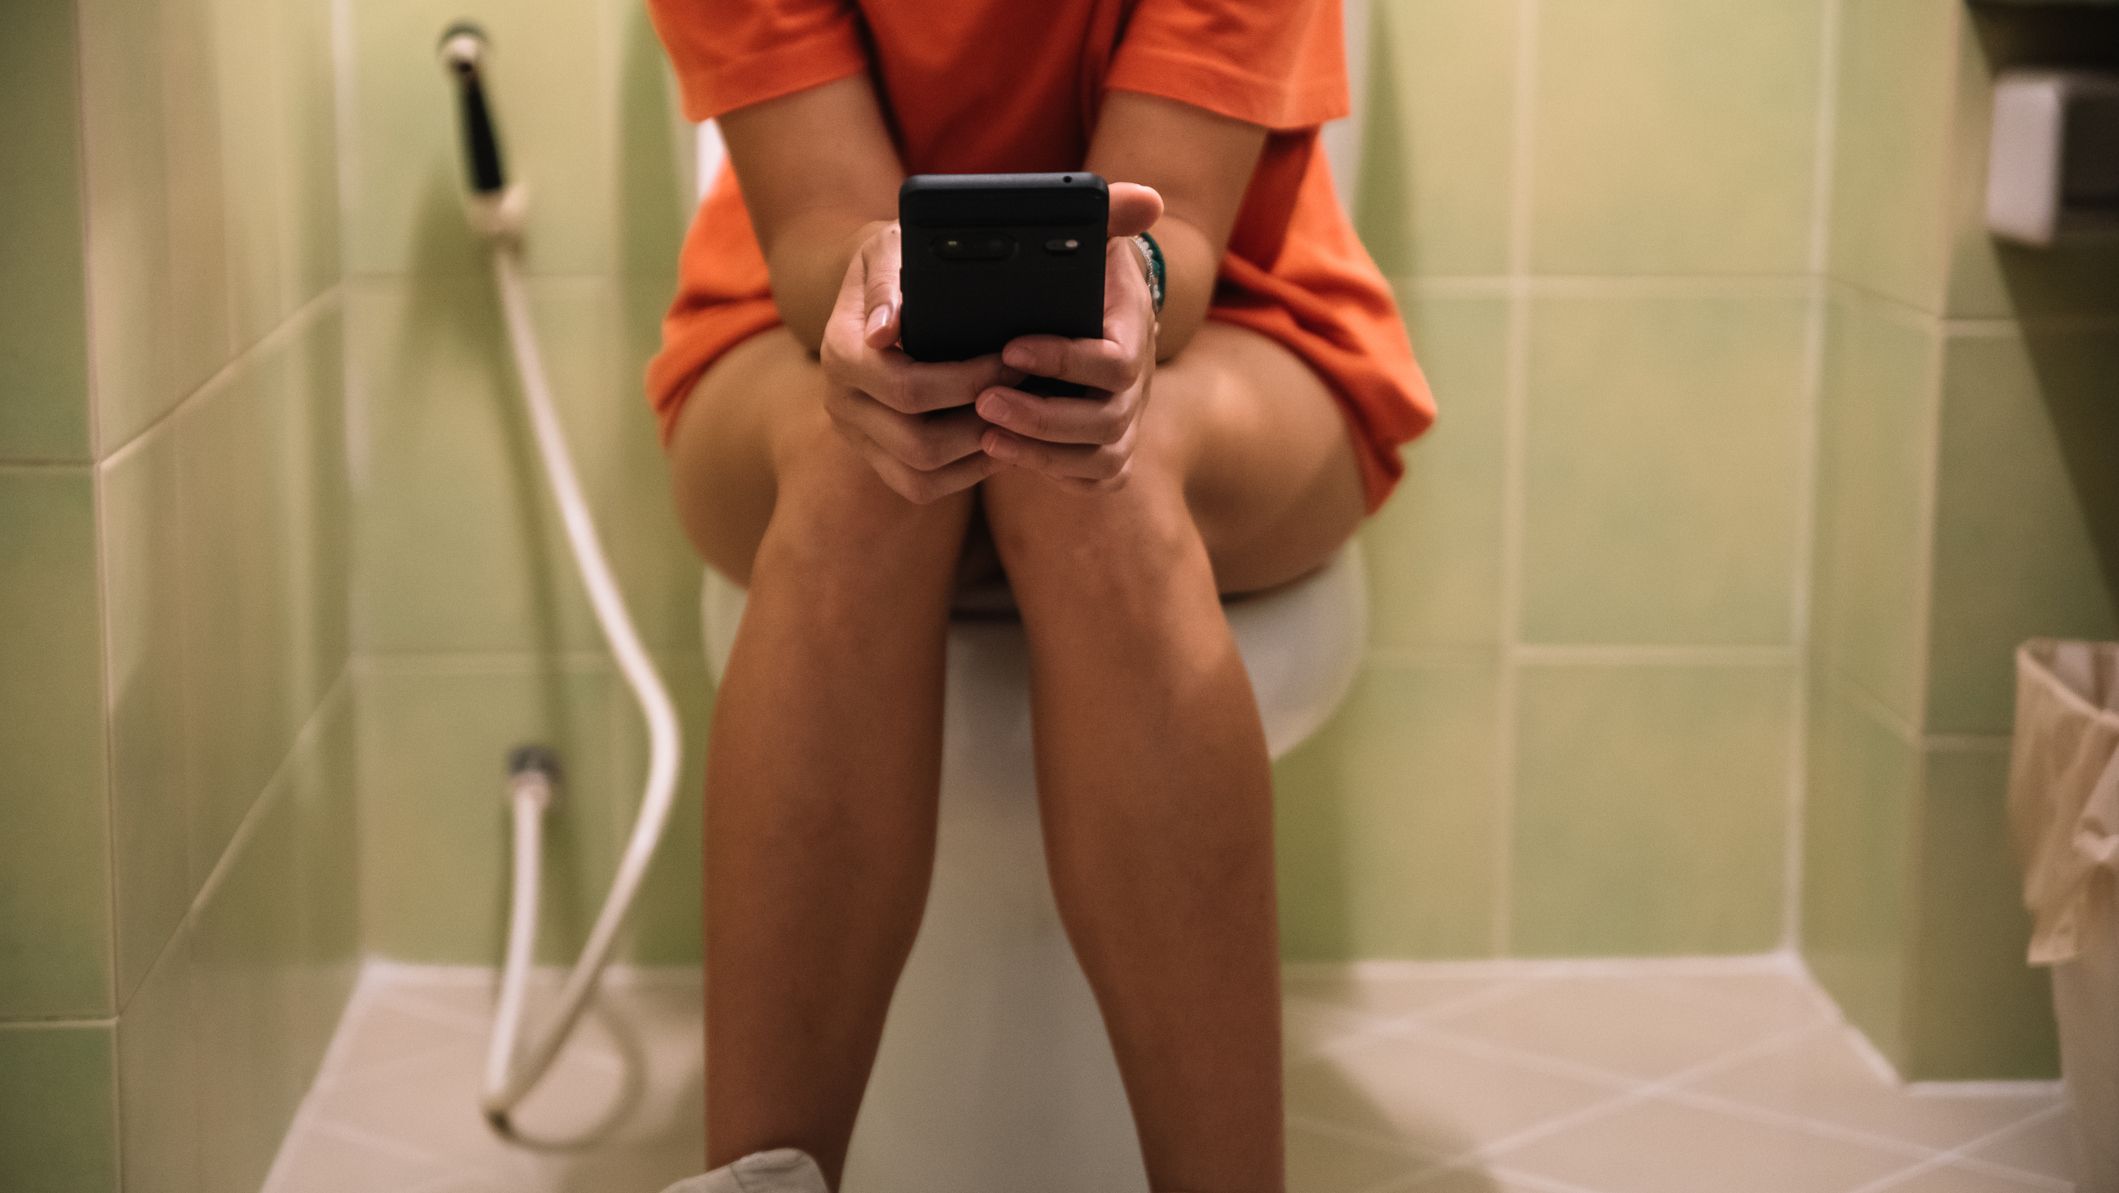 https://hips.hearstapps.com/hmg-prod/images/woman-sitting-on-a-toilet-holding-a-mobile-phone-in-royalty-free-image-1701889213.jpg?crop=1xw:0.84276xh;center,top